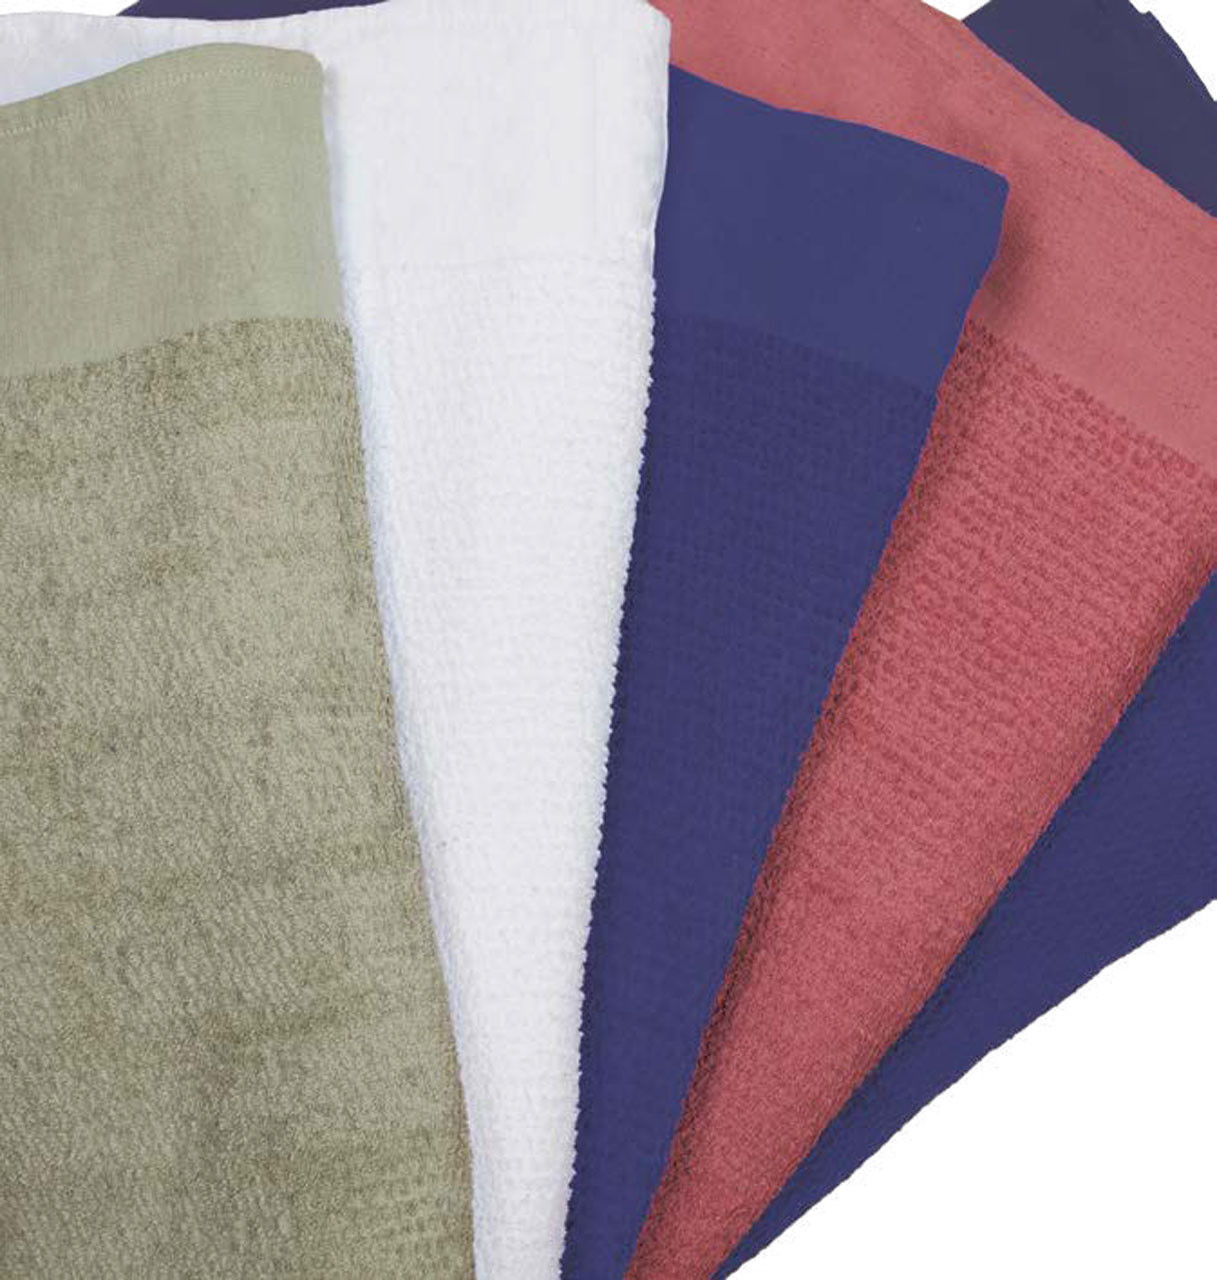 What is the weave of terry cloth blankets used in Terry Hospital Blankets?